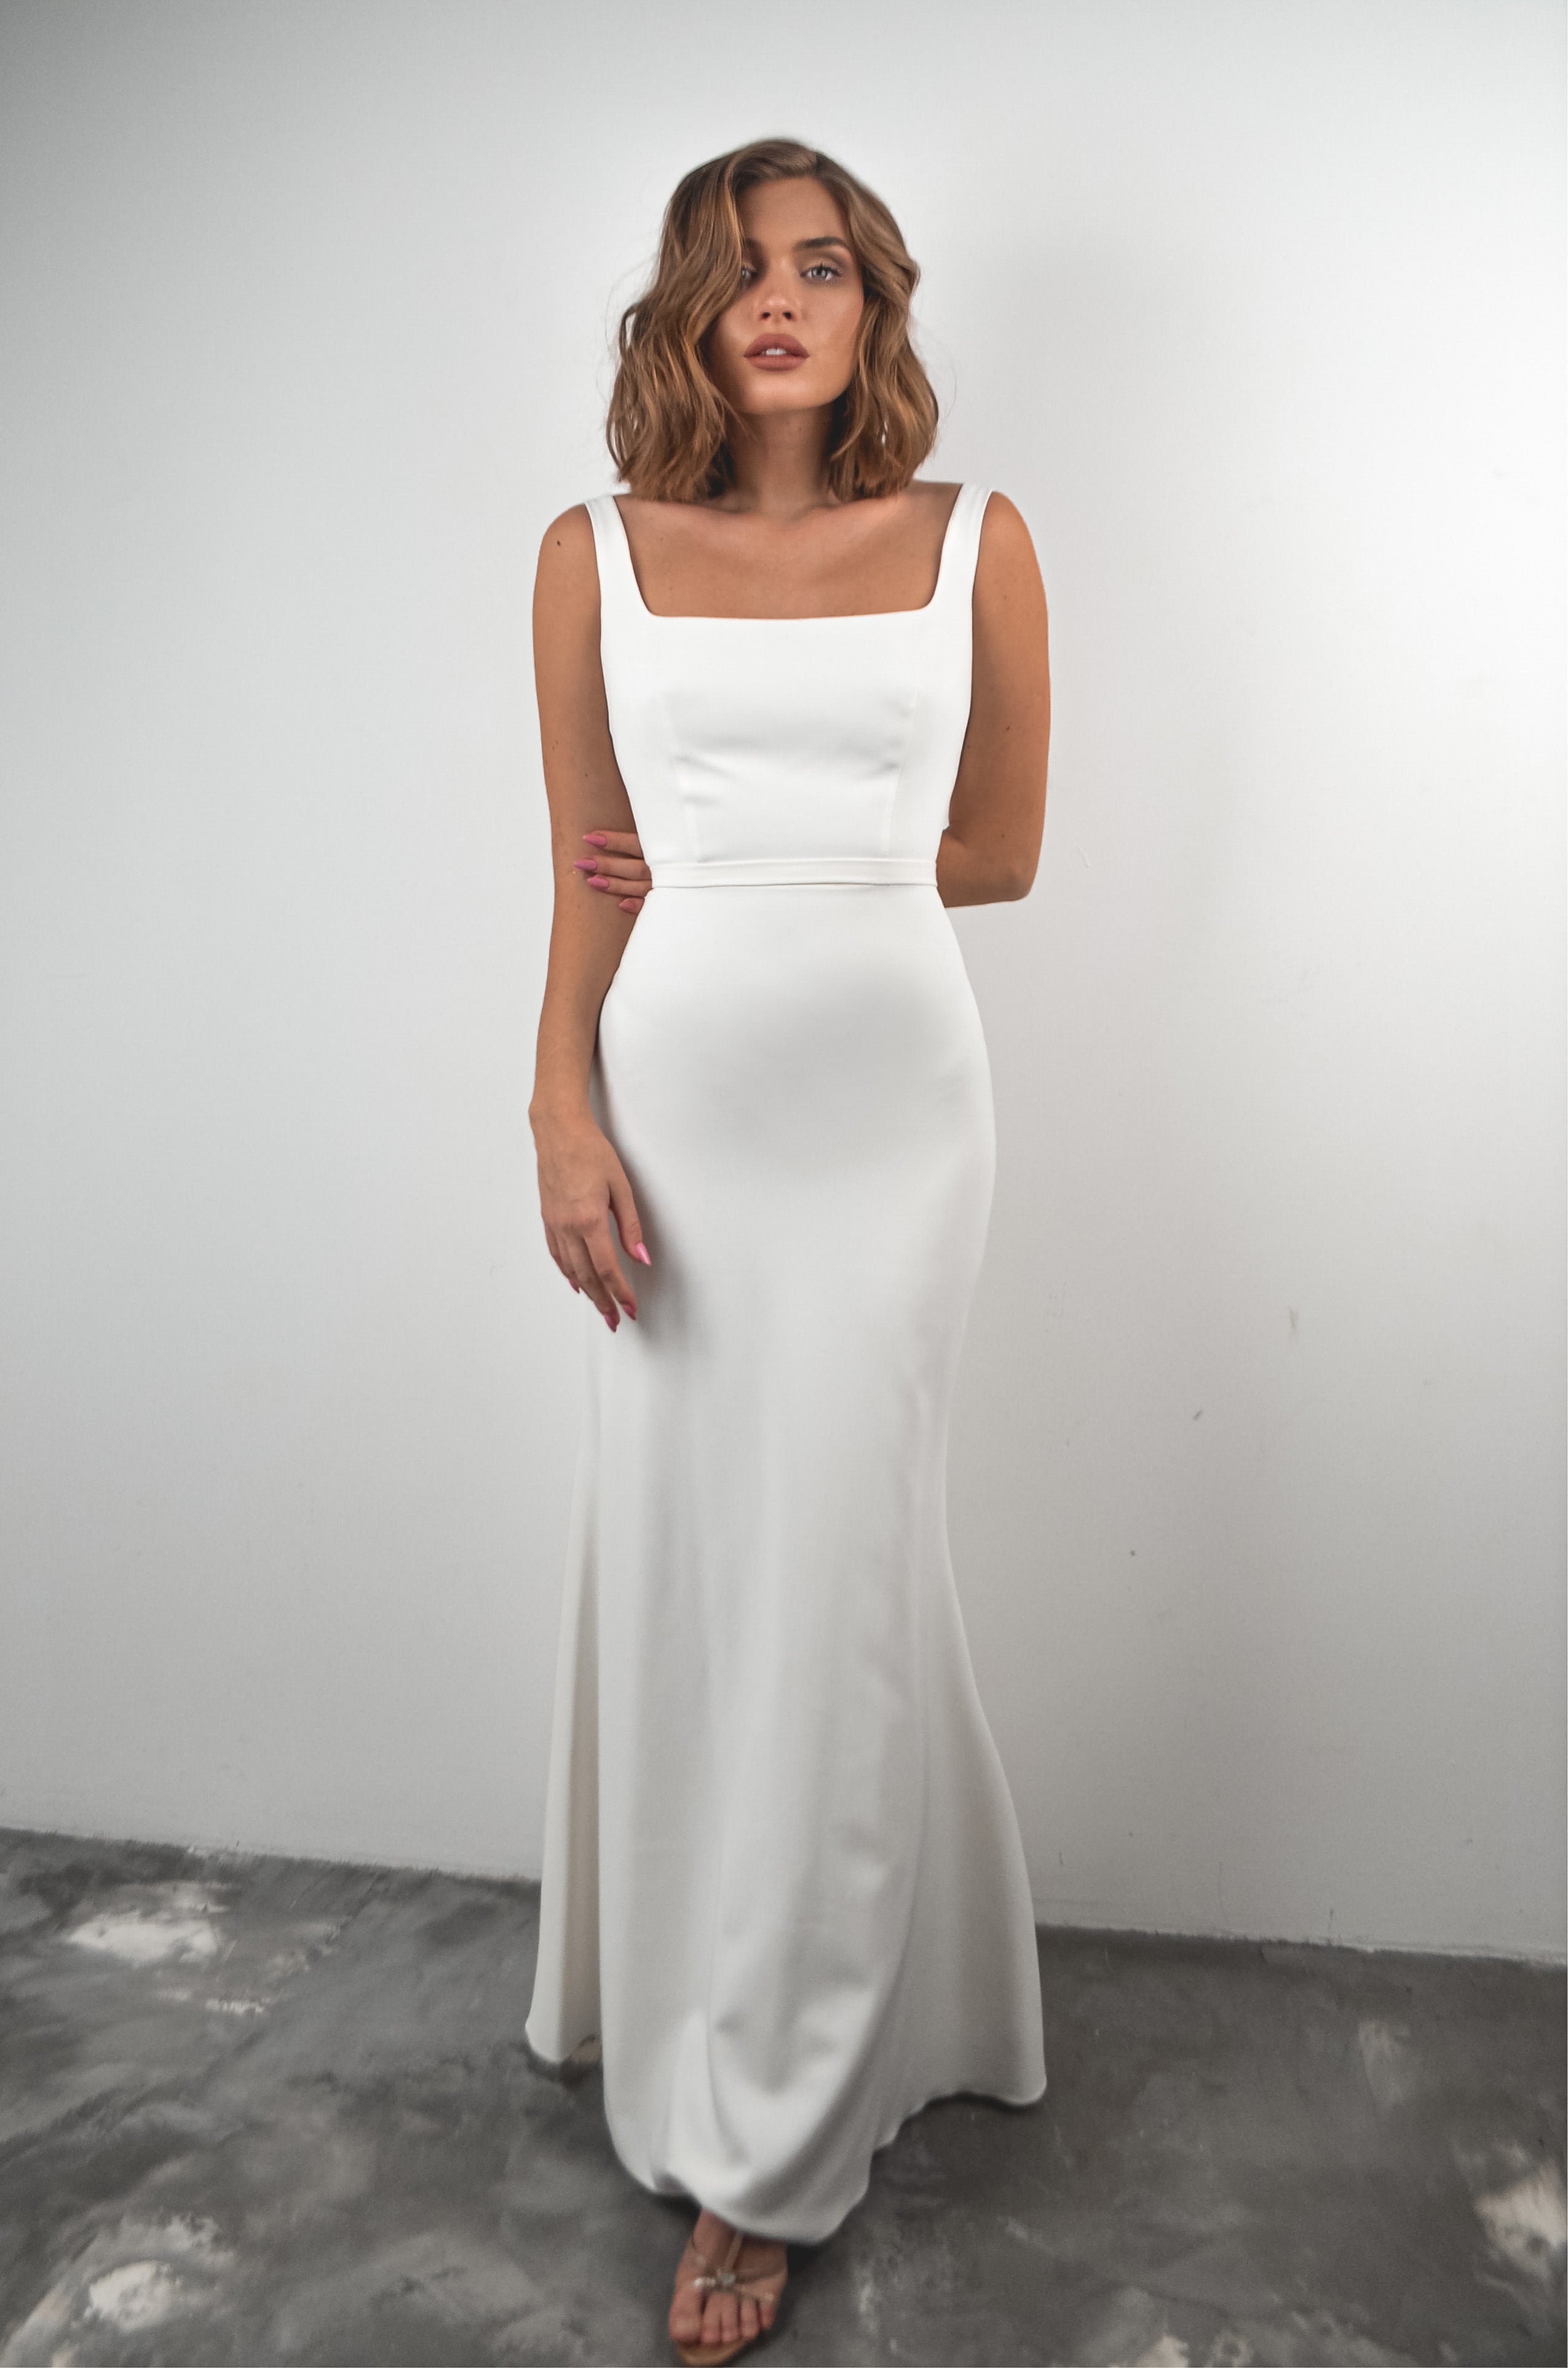 Classic Ball Gown Empire Waist Wedding Dresses | Cocomelody®